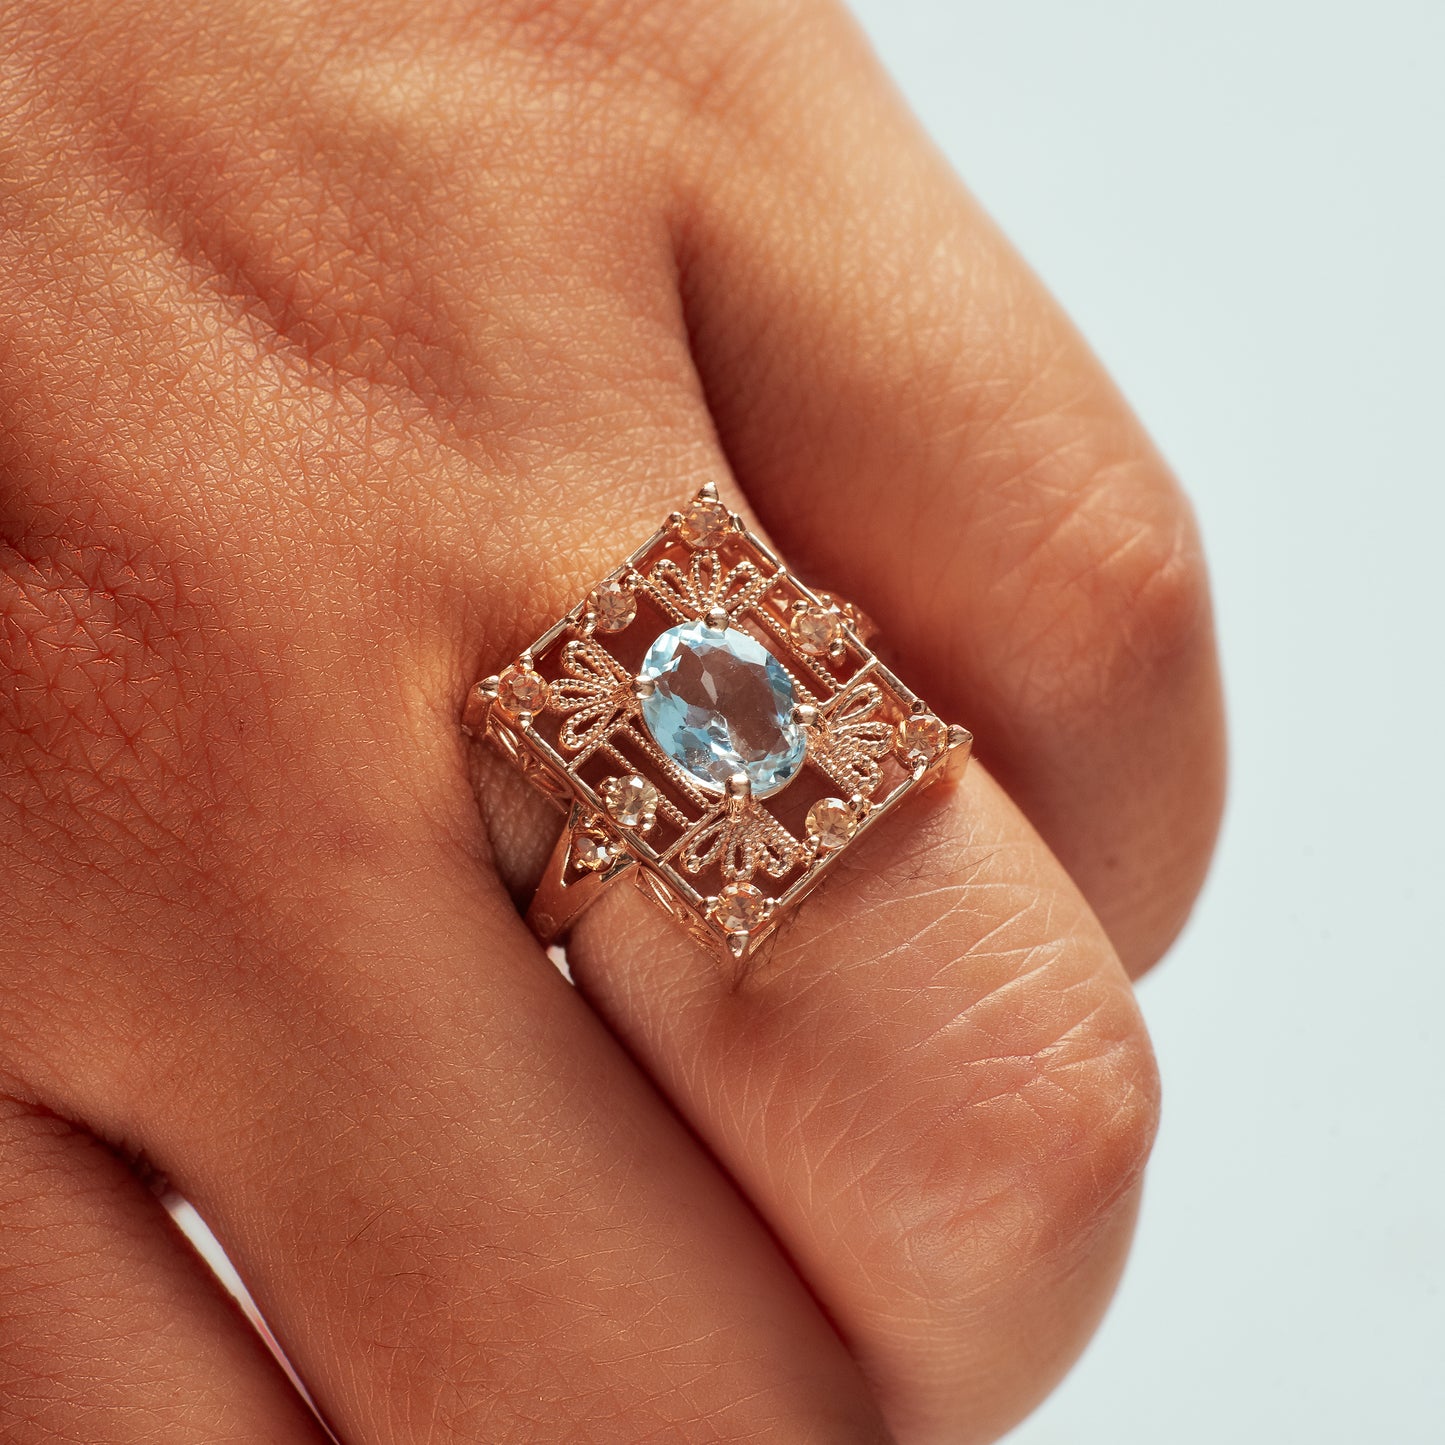 14k rose gold rectangle shaped ring with detailed metalwork, champagne diamonds, and an aquamarine center stone modeled on hand.